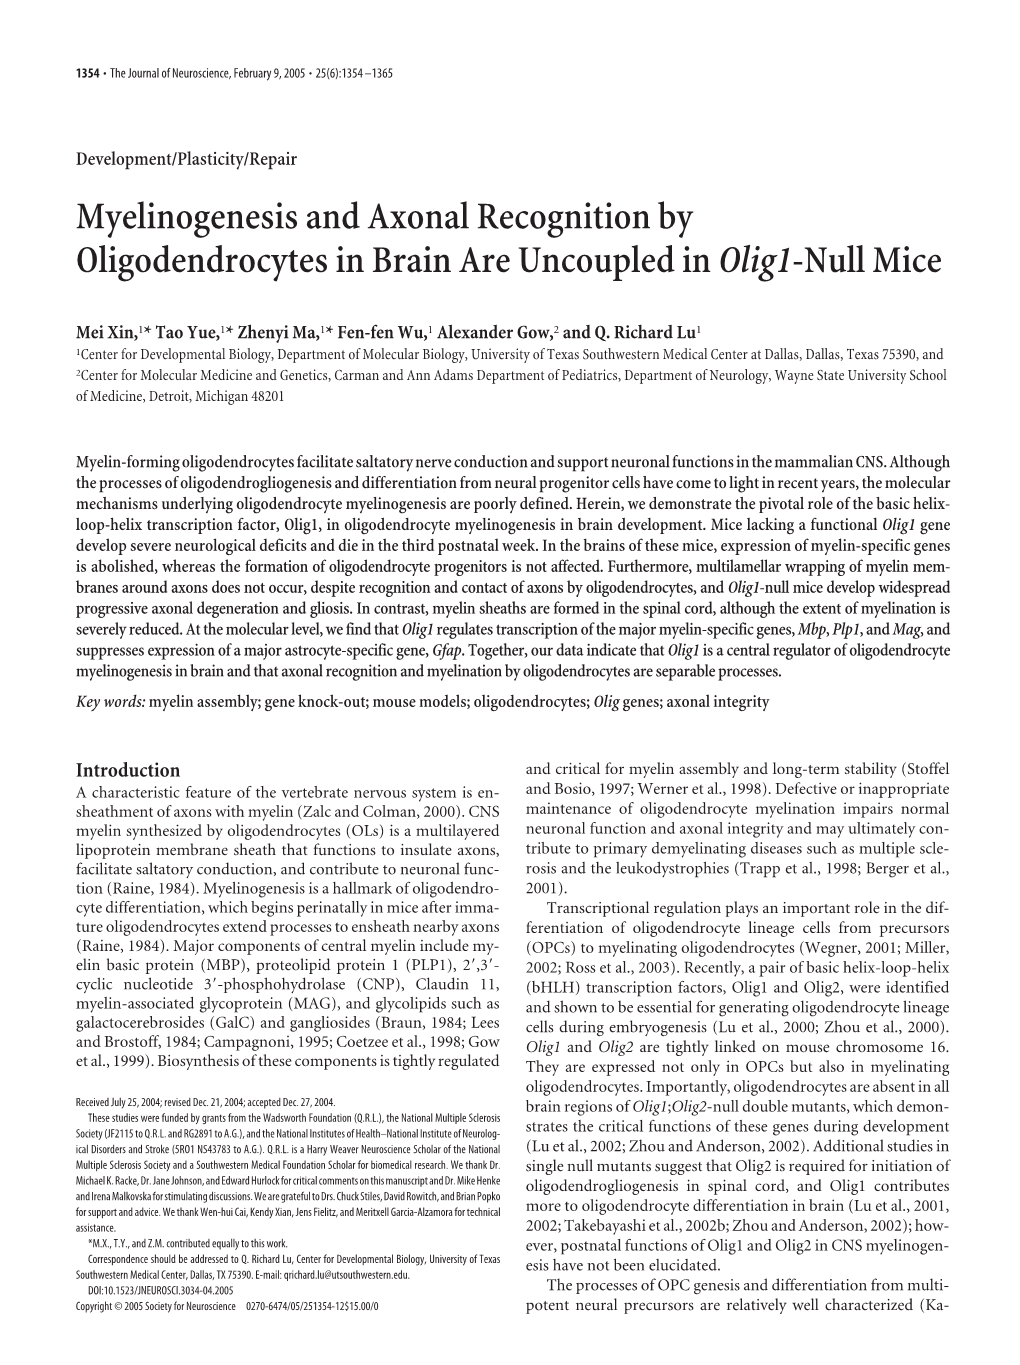 Myelinogenesis and Axonal Recognition by Oligodendrocytes in Brain Are Uncoupled in Olig1-Null Mice